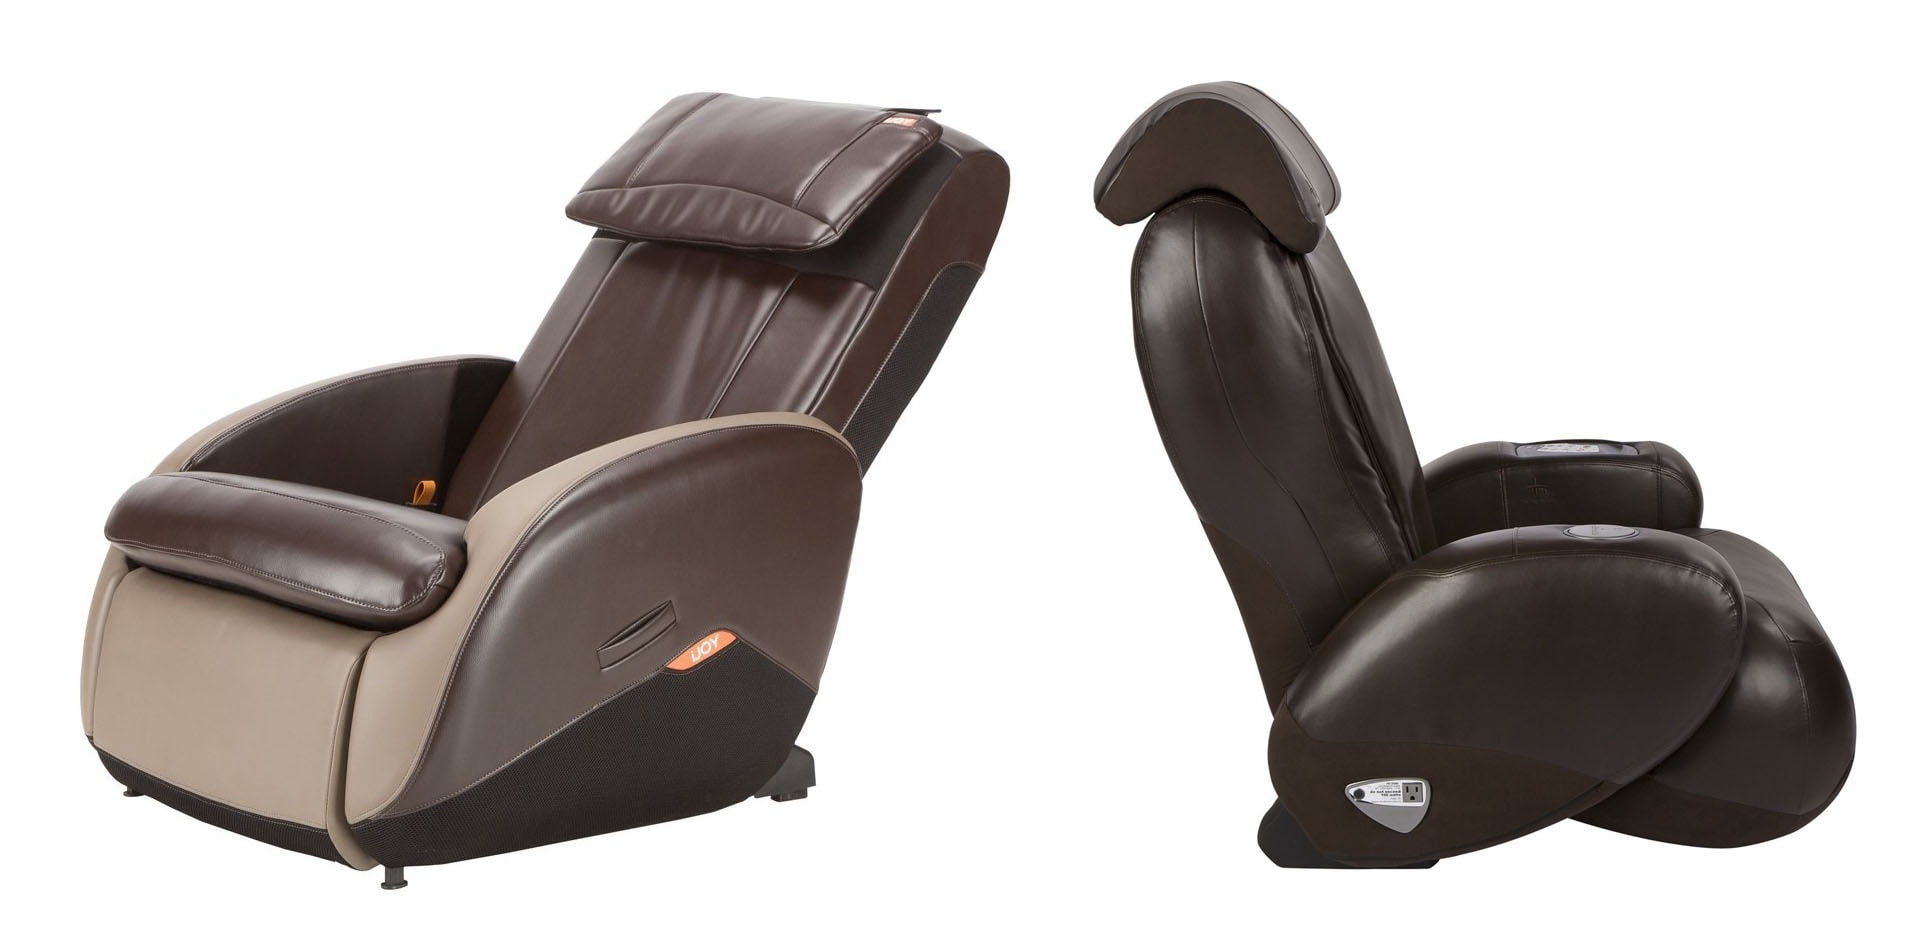 Top 2 Best Ijoy Massage Chairs Available Online In 2019 Review